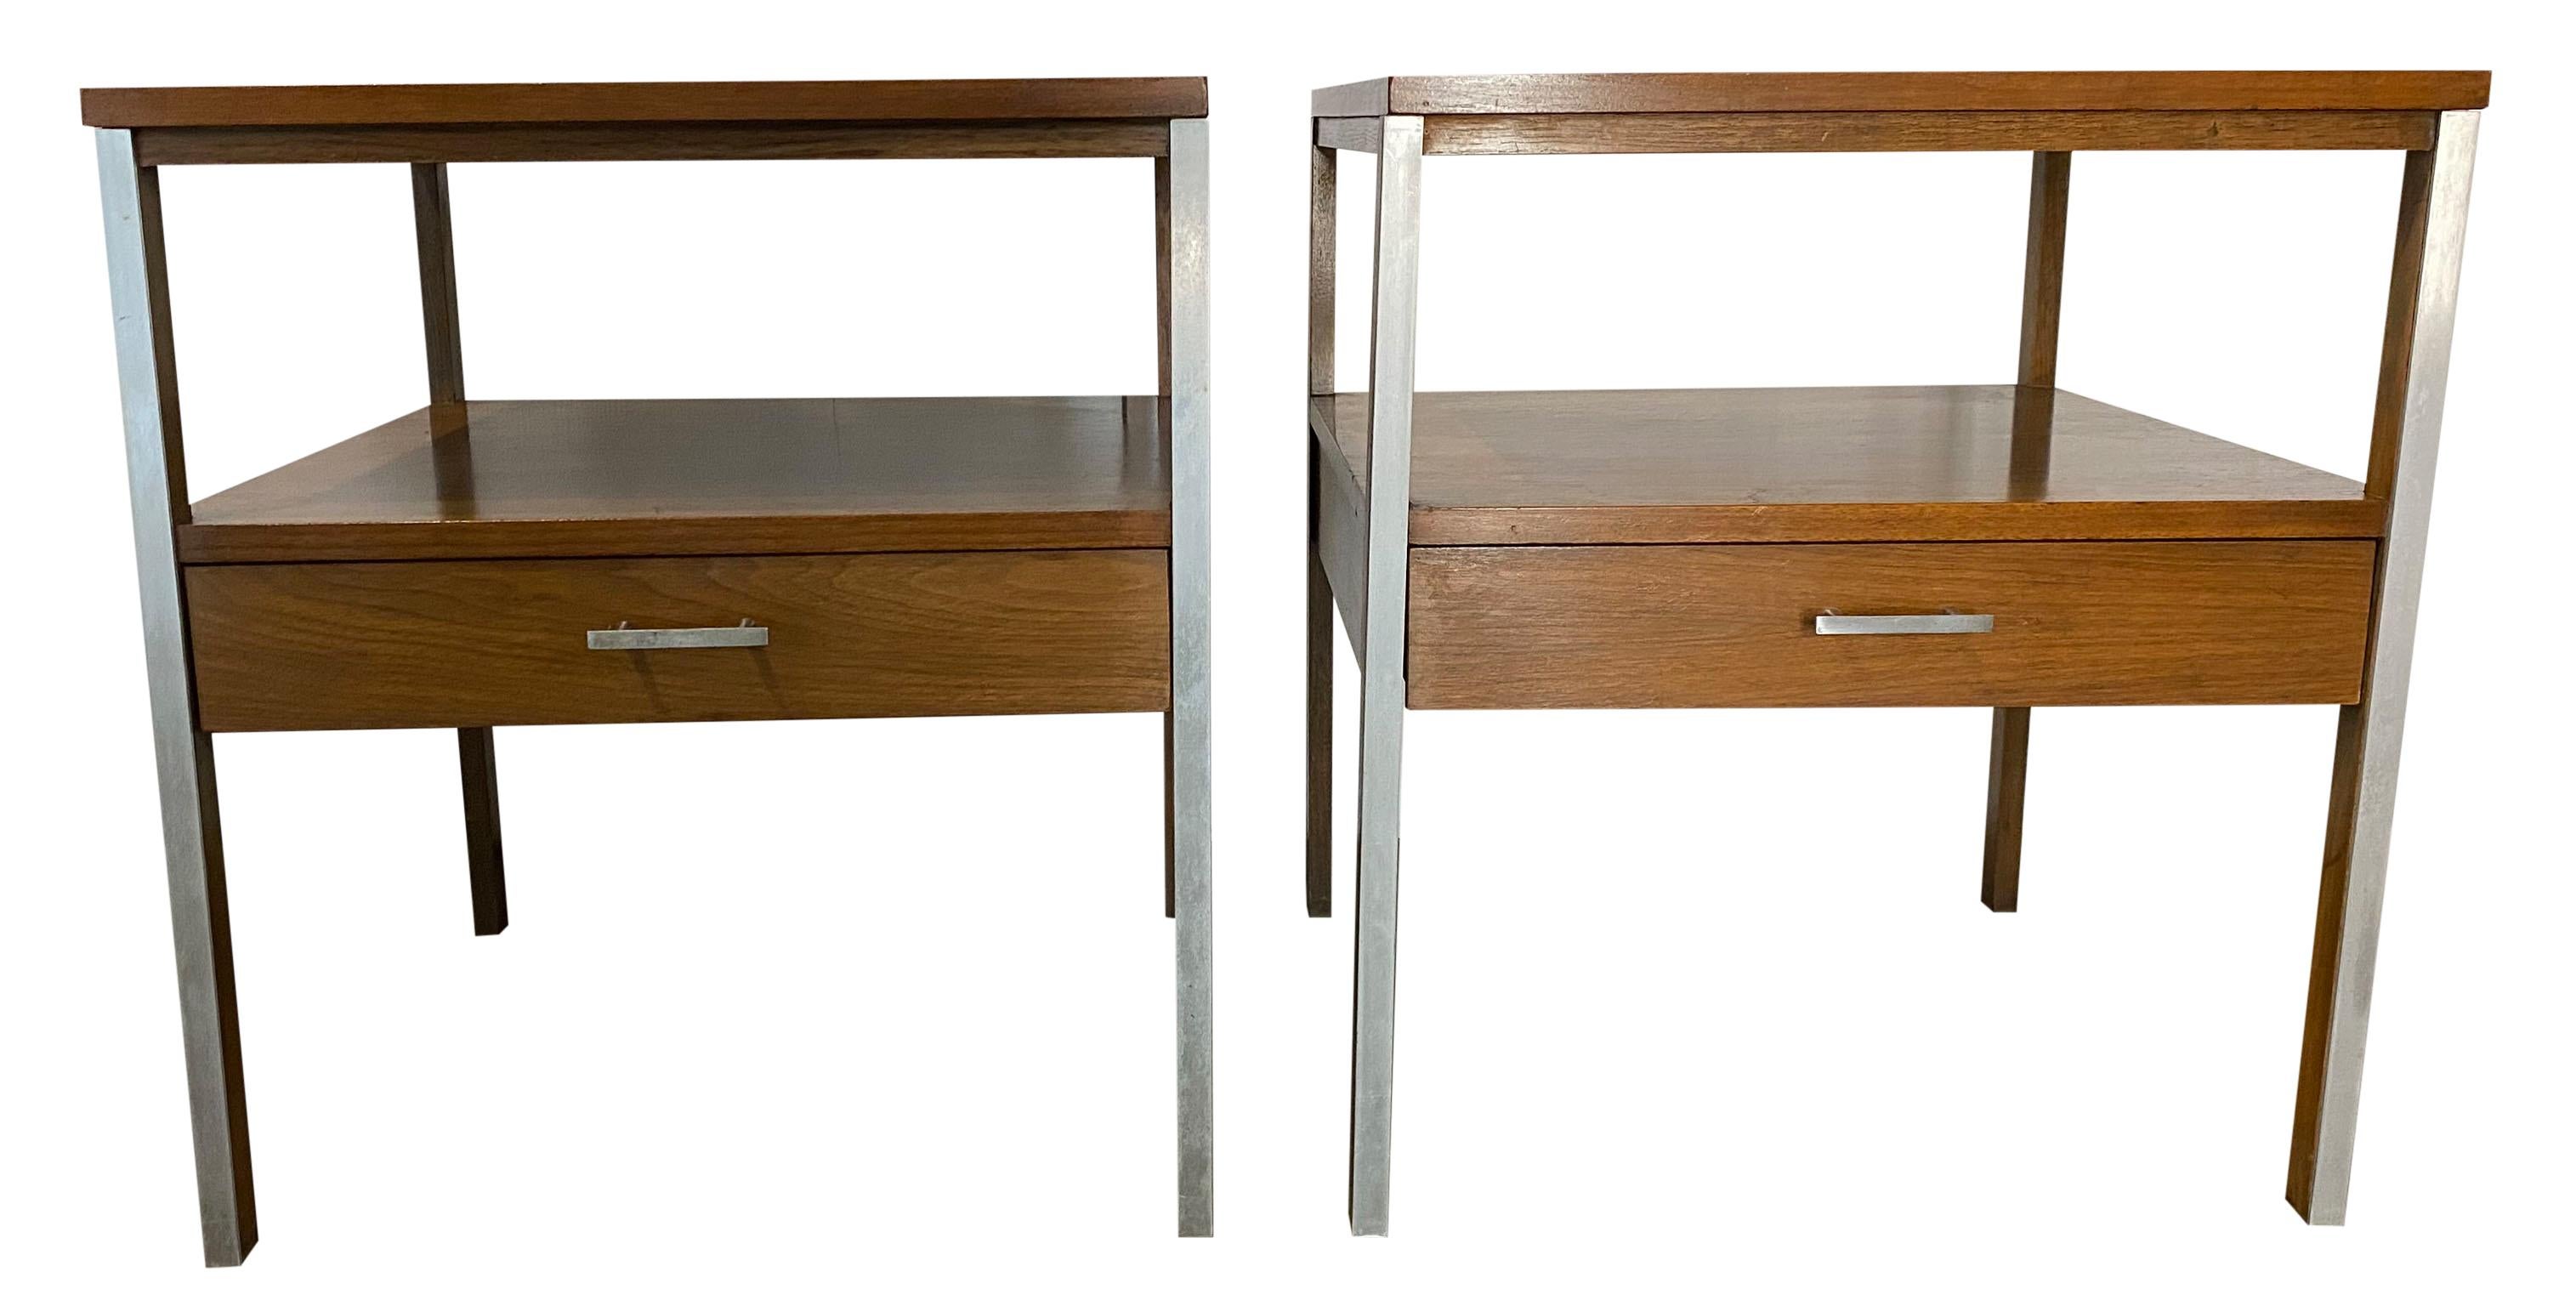 Beautiful pair of Paul McCobb Calvin walnut nightstands lamp tables single drawer Calvin aluminum handles and accents Minimalist original medium walnut brown finish. Very delicate geometric designed pair of nightstands with square legs - All solid